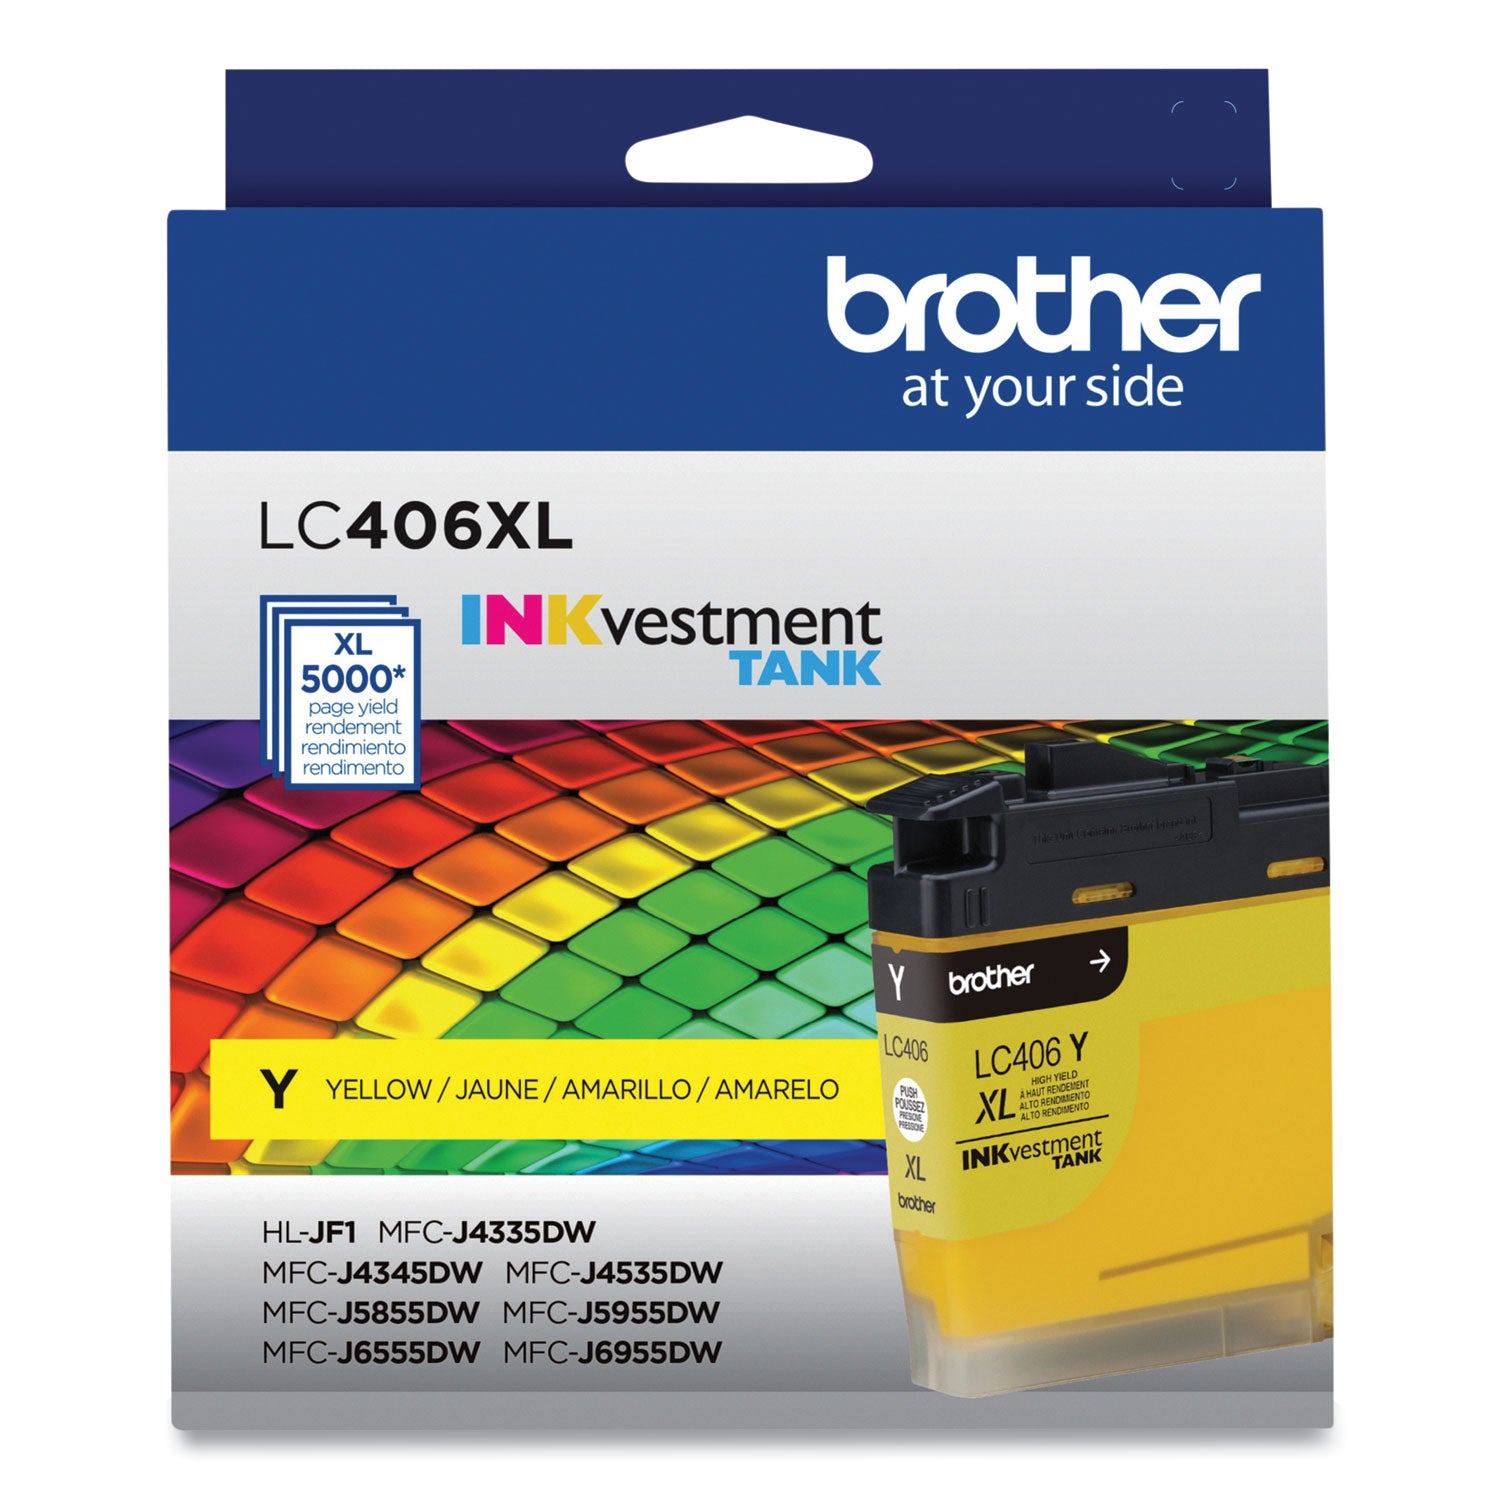 lc406xlys-inkvestment-high-yield-ink-5000-page-yield-yellow_brtlc406xlys - 1